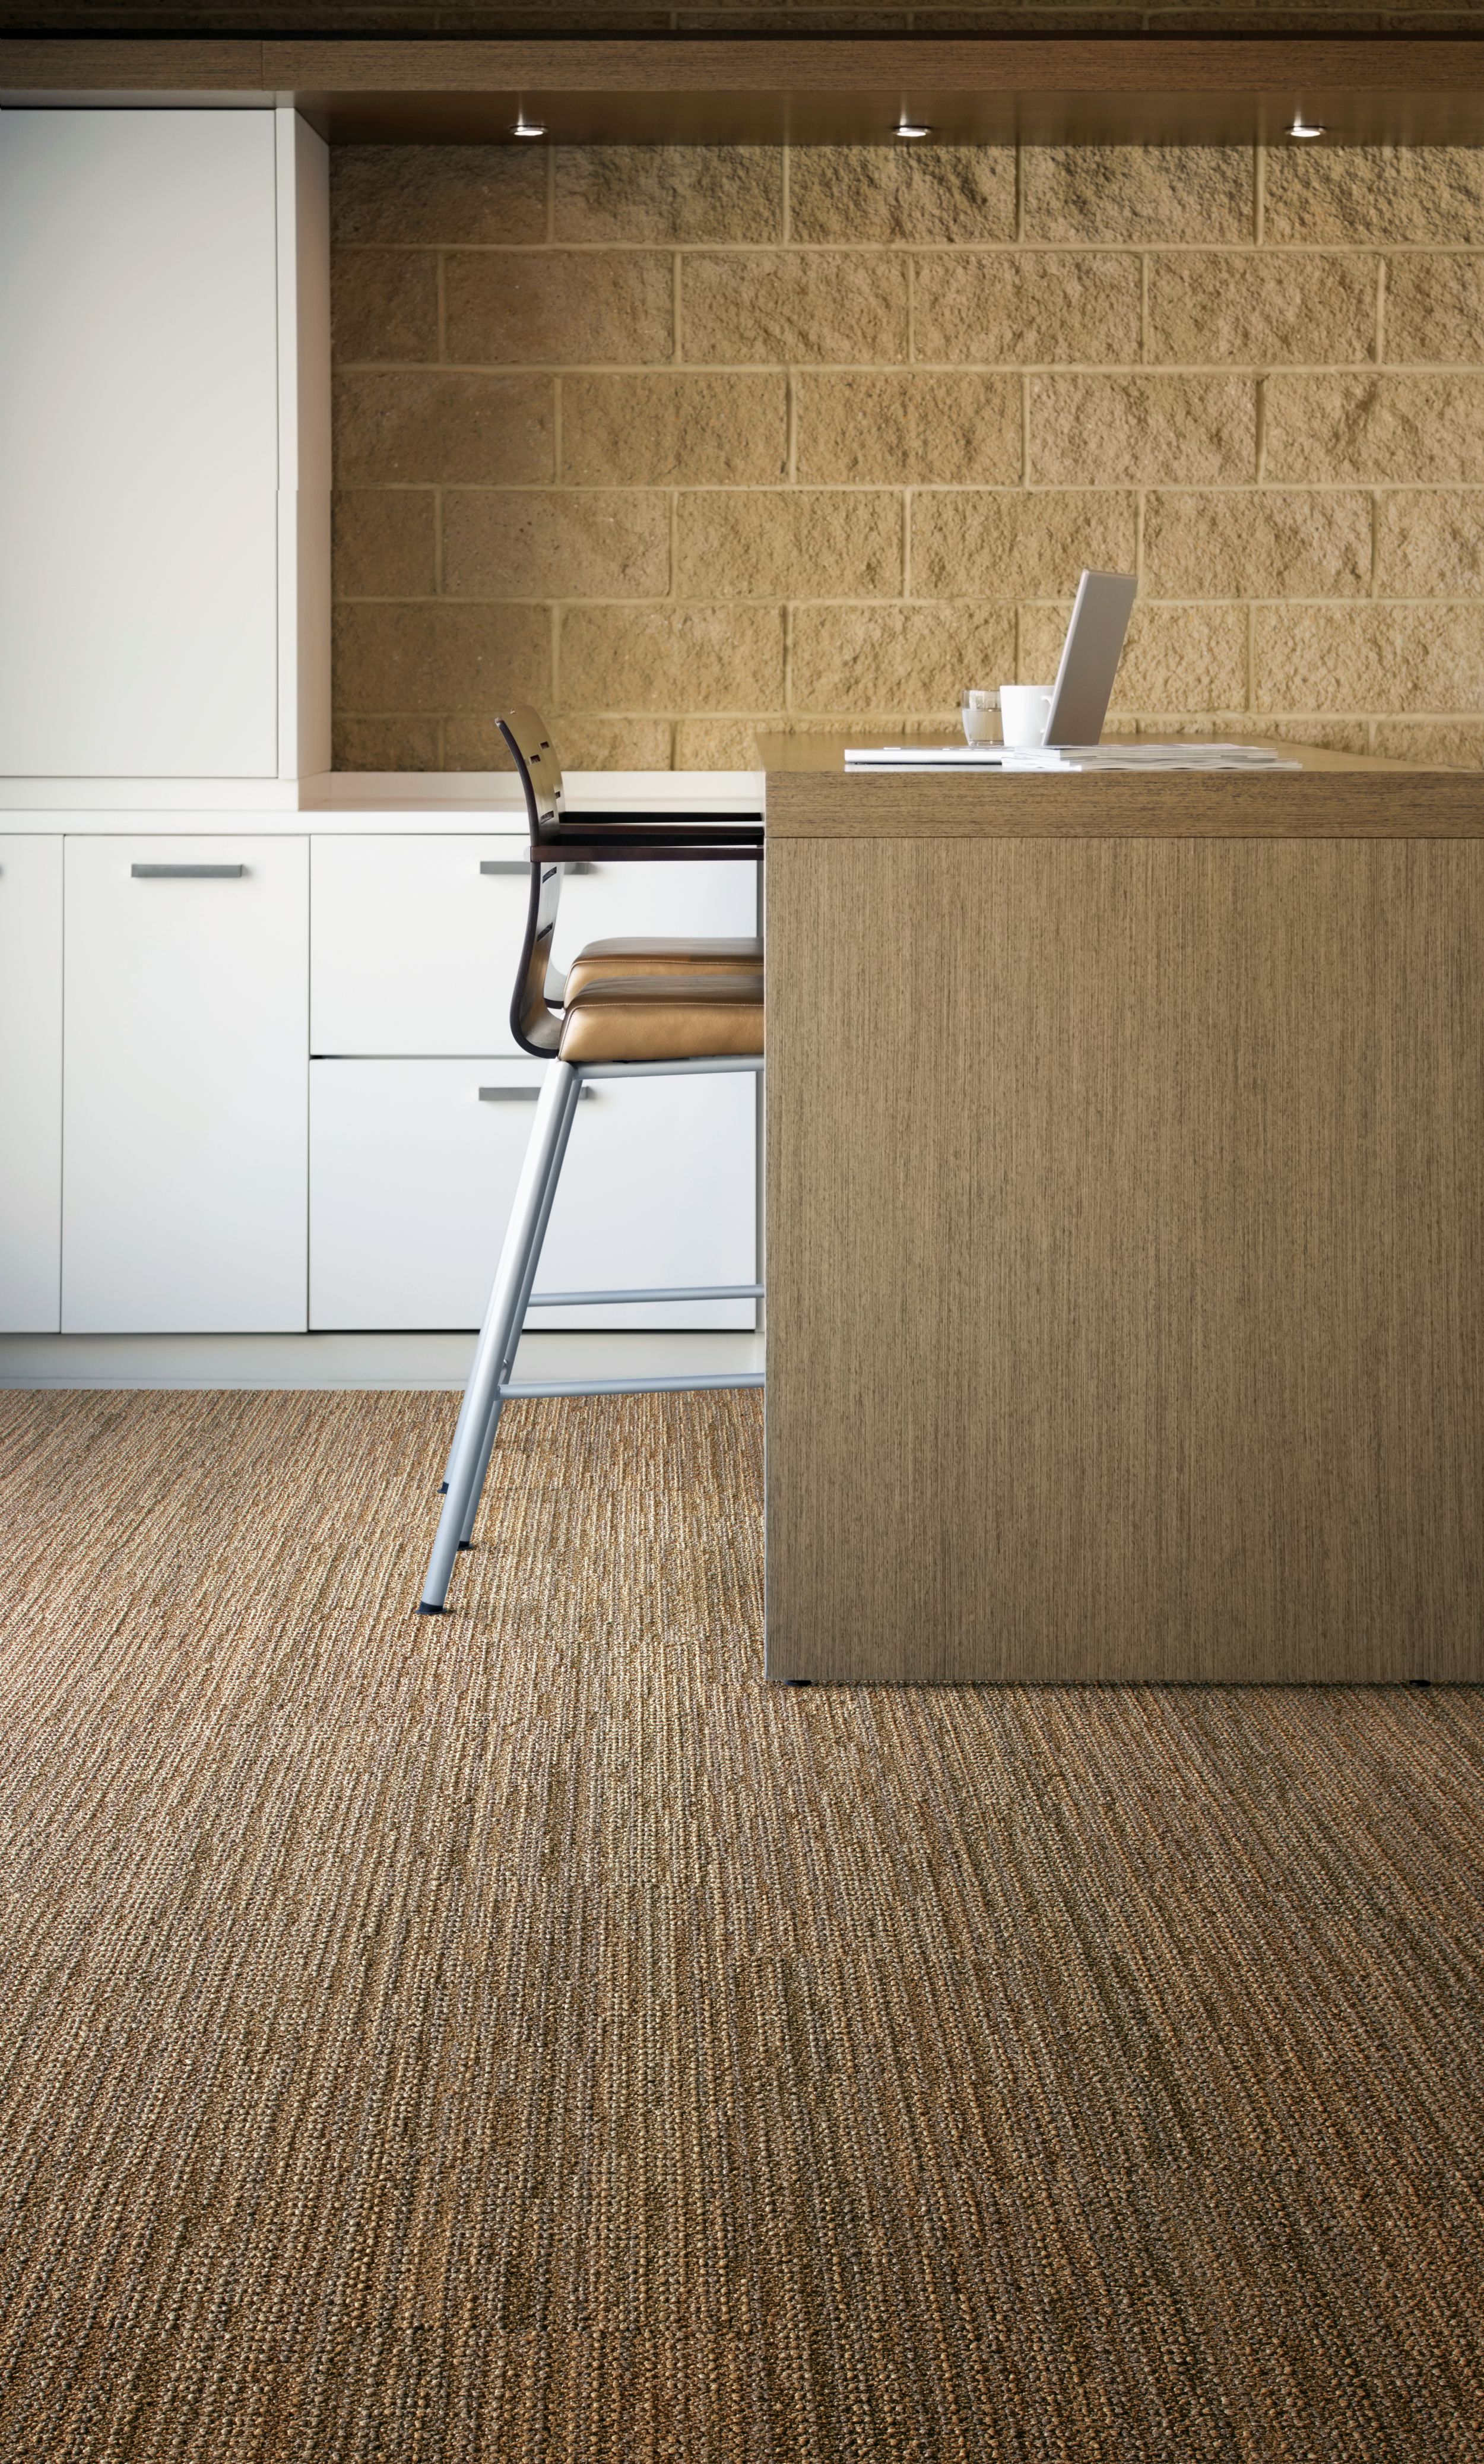 Interface Afternoon Light carpet tile in workspace with white file cabinets and desk imagen número 5